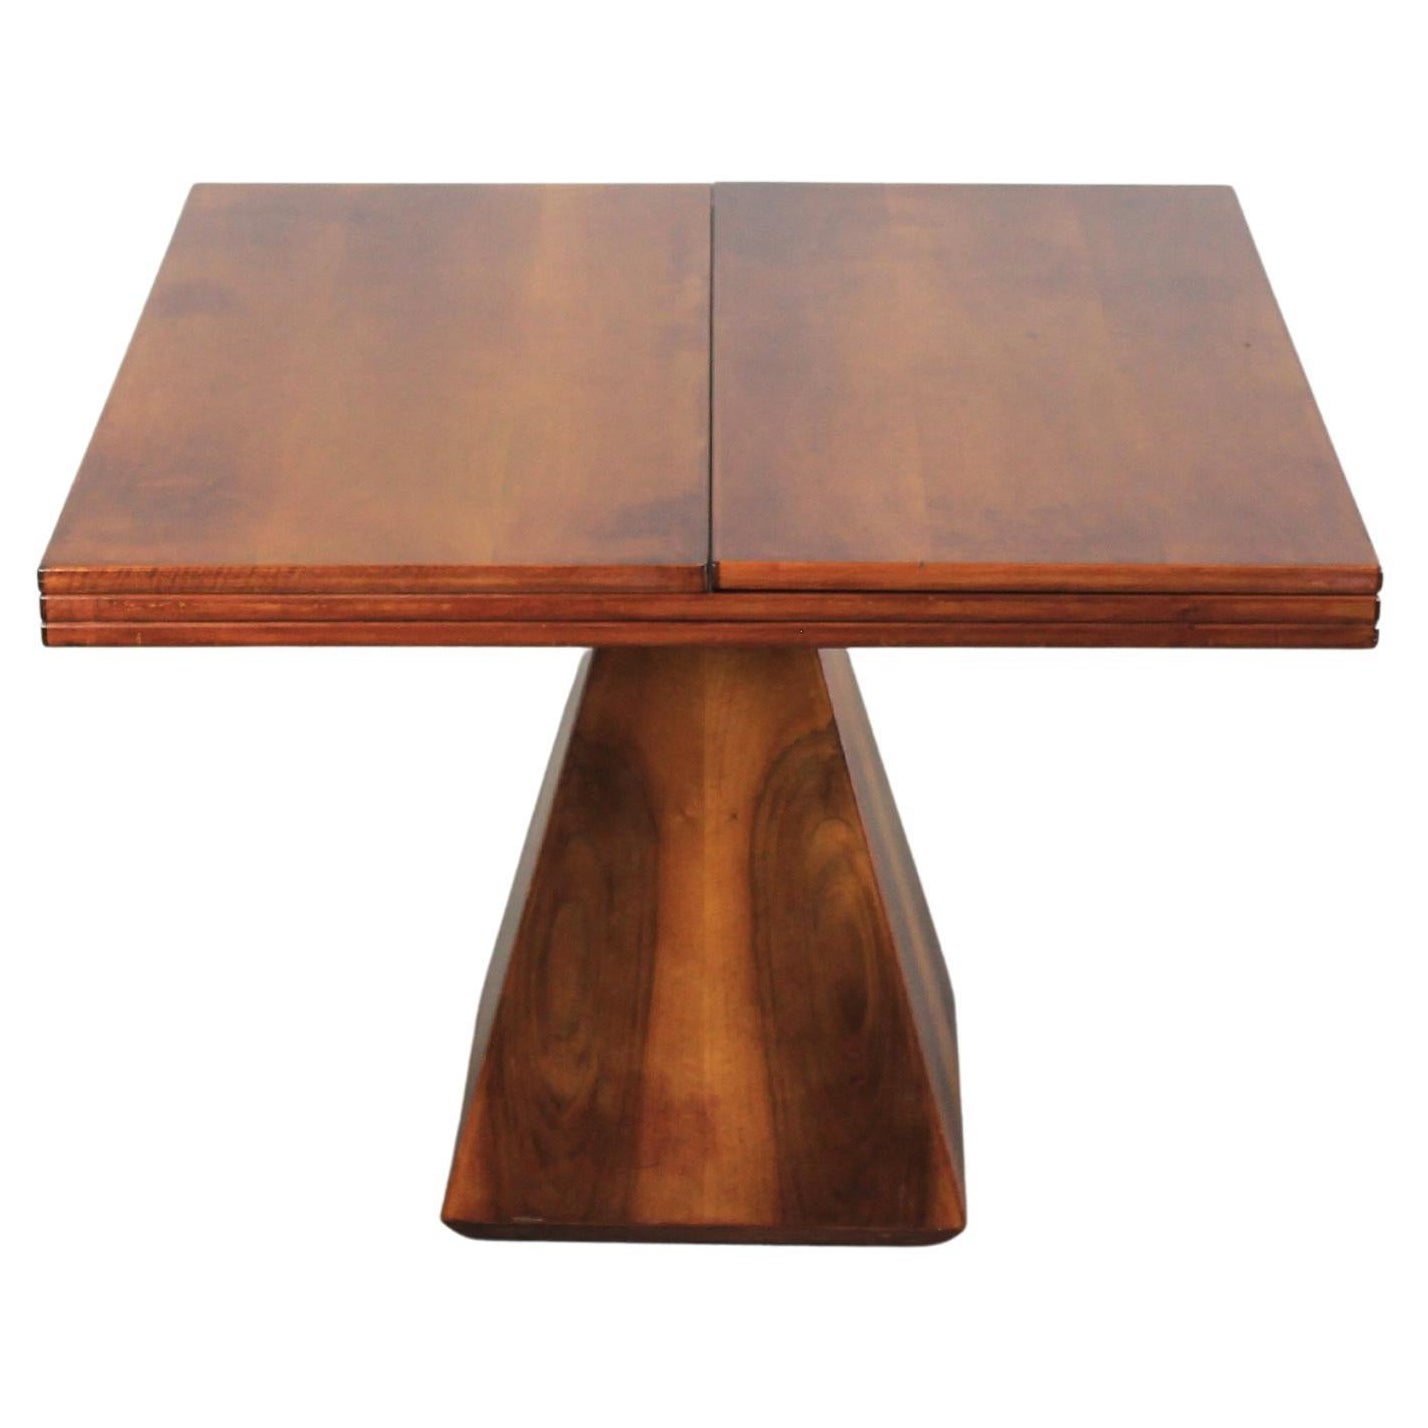 Vittorio Introini Chelsea Extendable Table in Walnut Wood by Saporiti 1960s For Sale